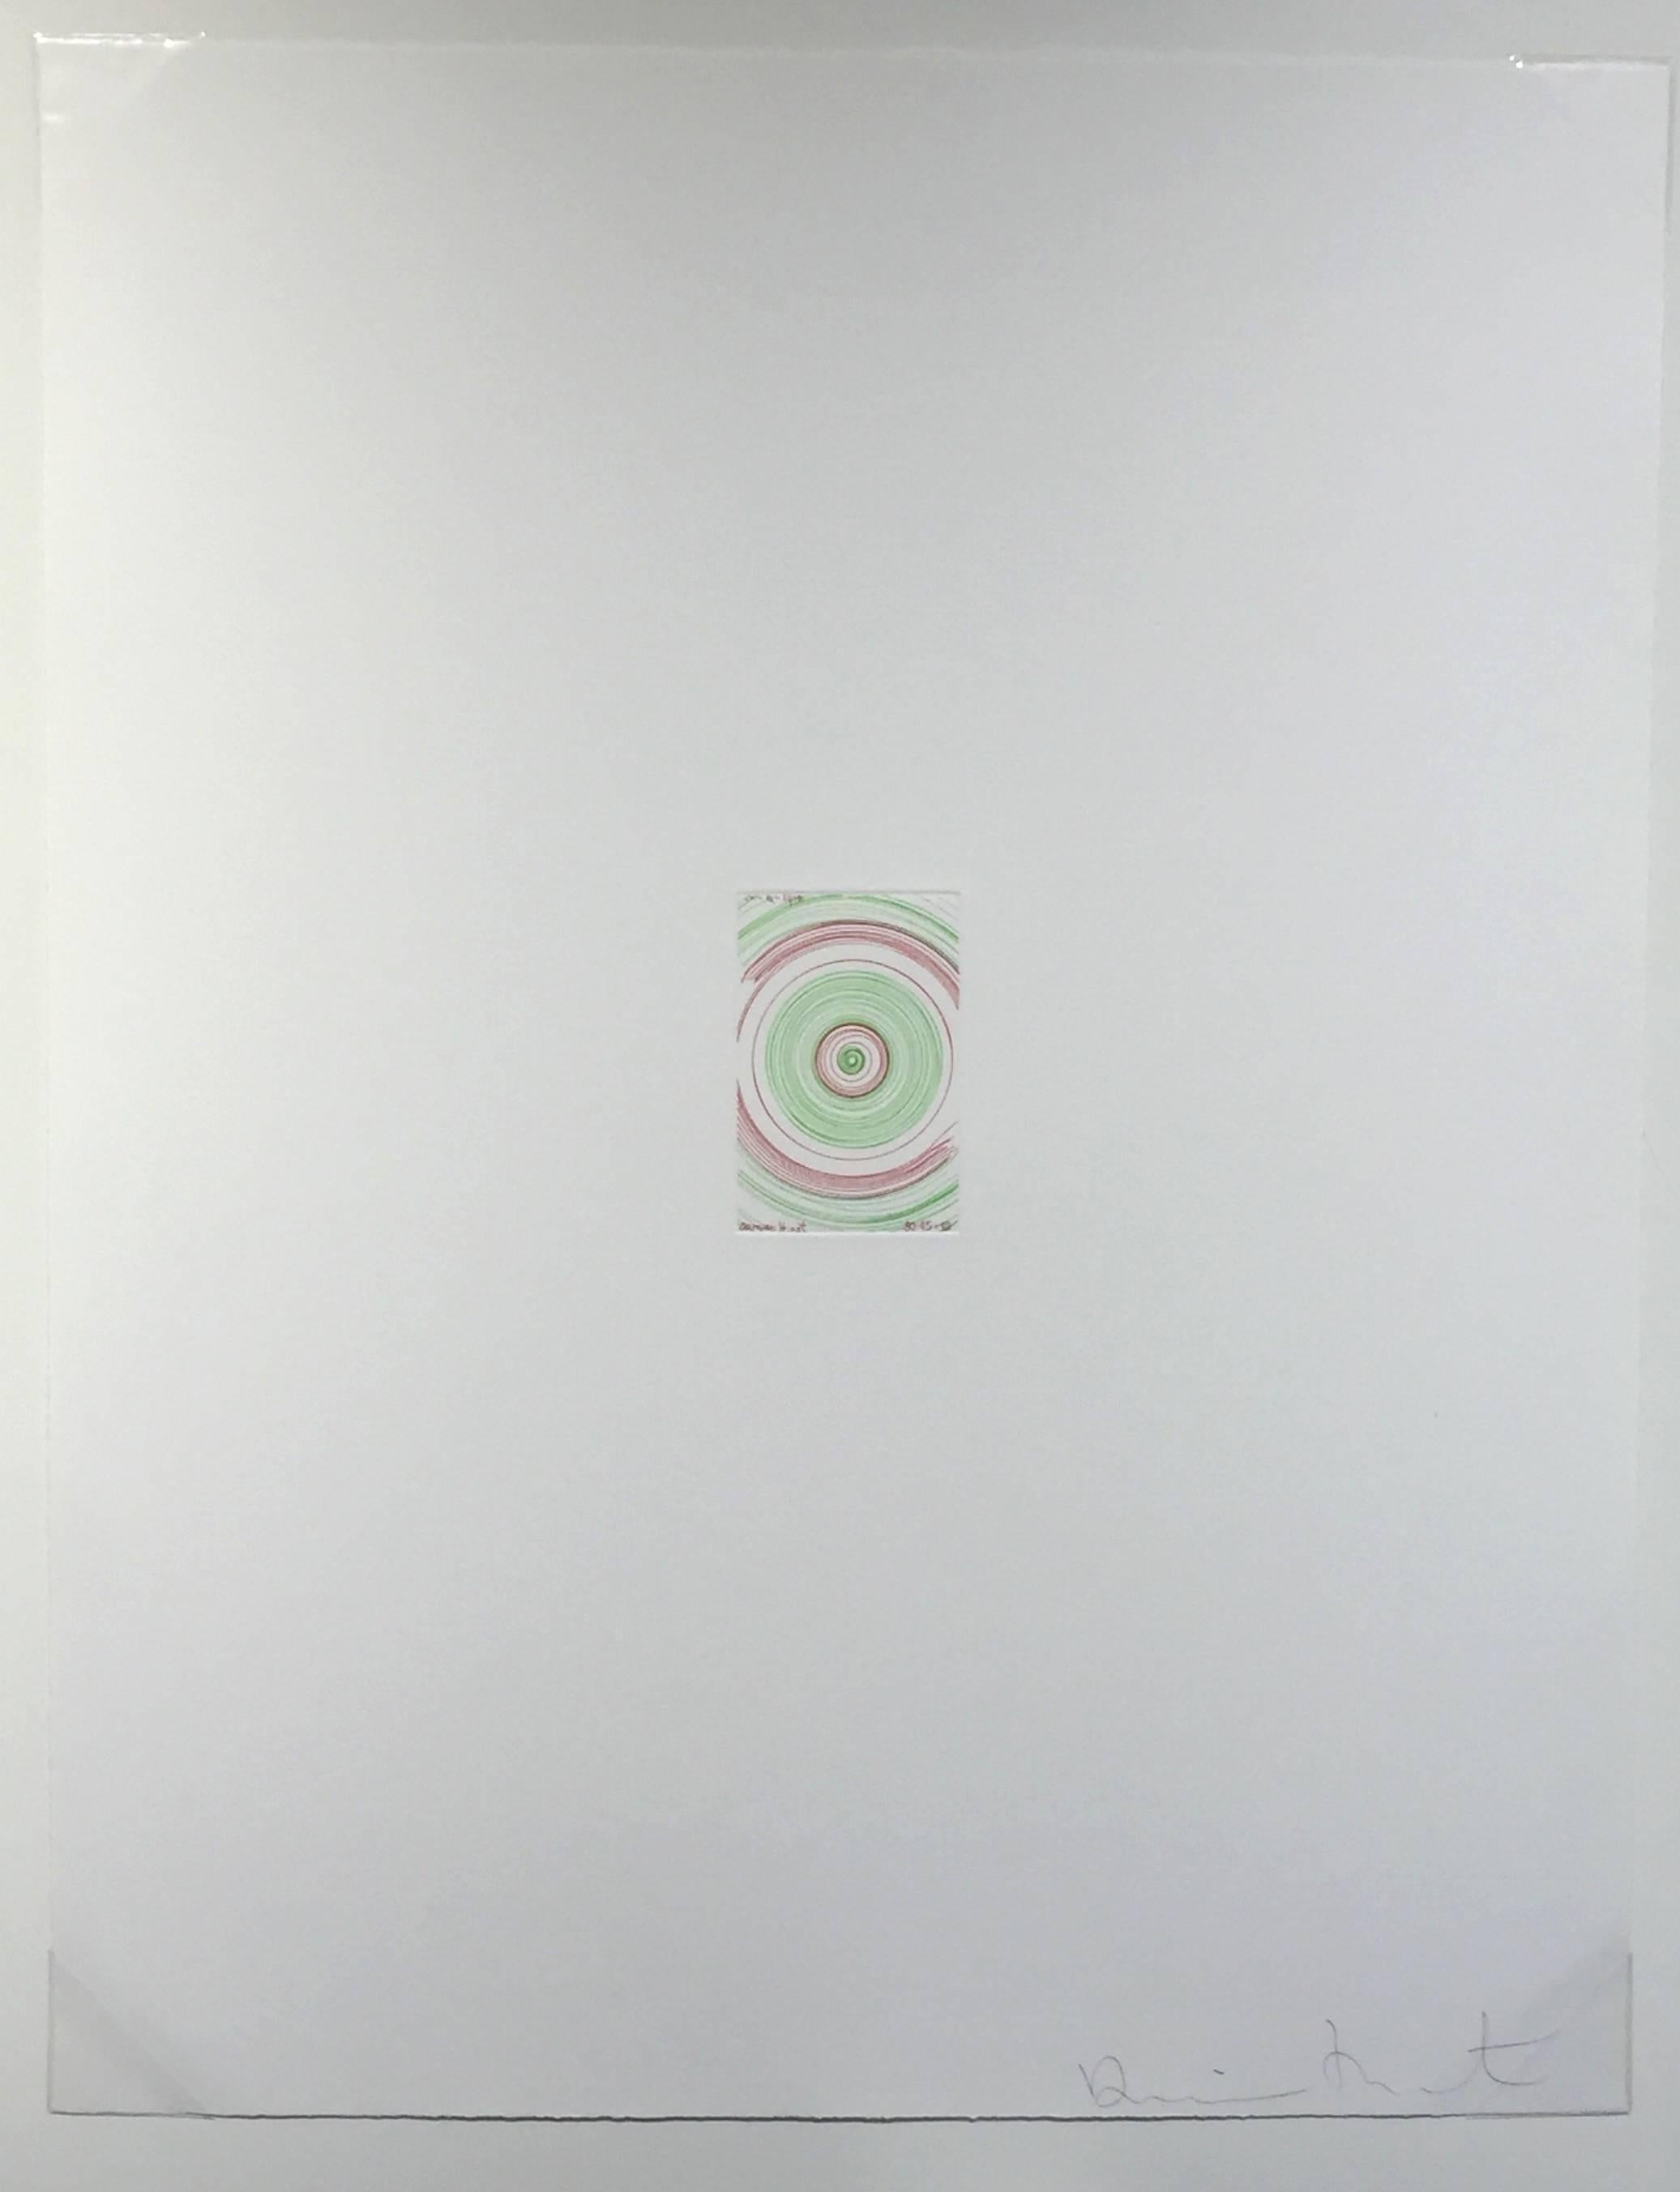 In A Spin, de la série « In A Spin » - Young British Artists (YBA) Print par Damien Hirst